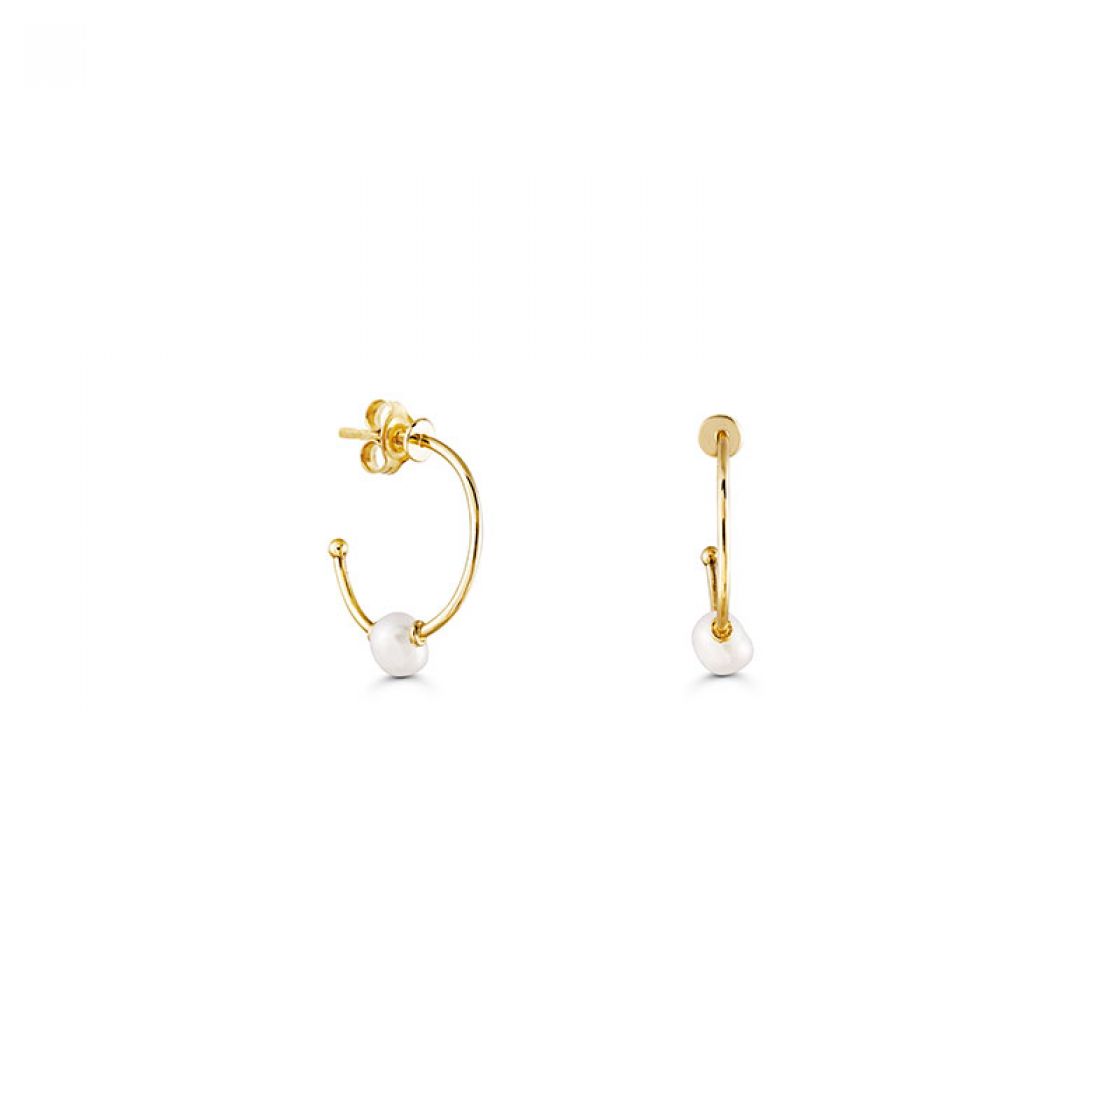 Little gold hoops accented with a small fresh water pearl.